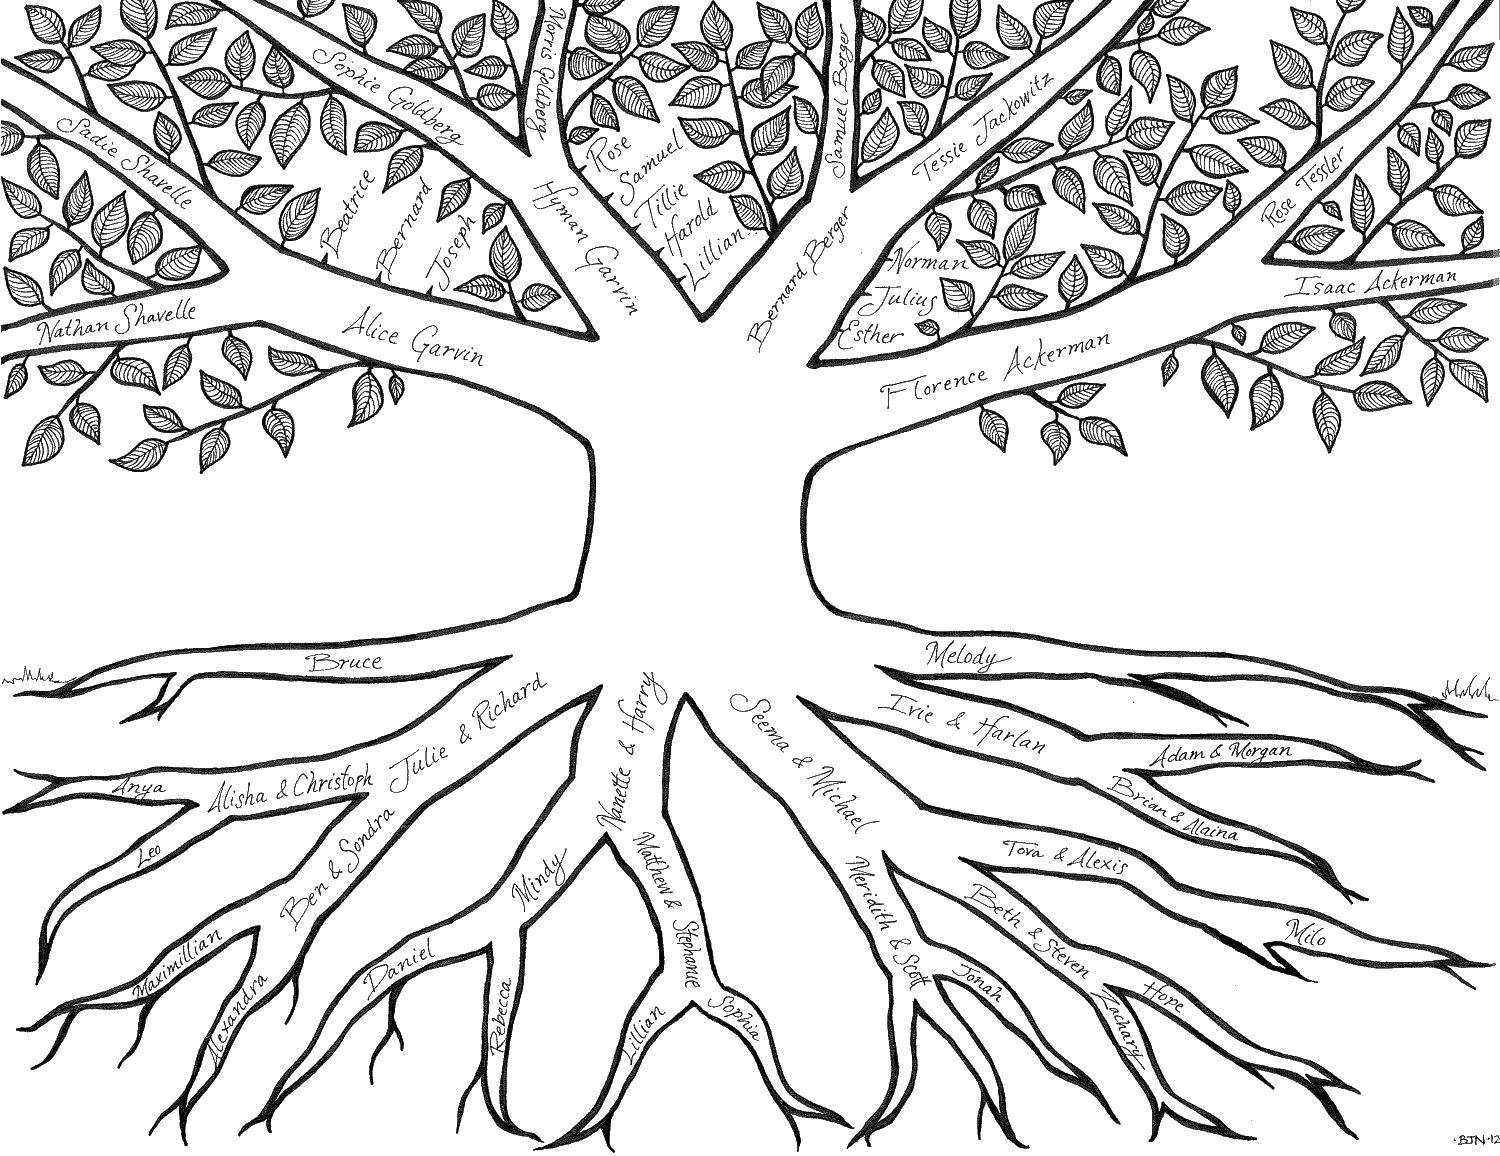 Coloring Family tree. Category Family tree. Tags:  tree, family, roots, branches.